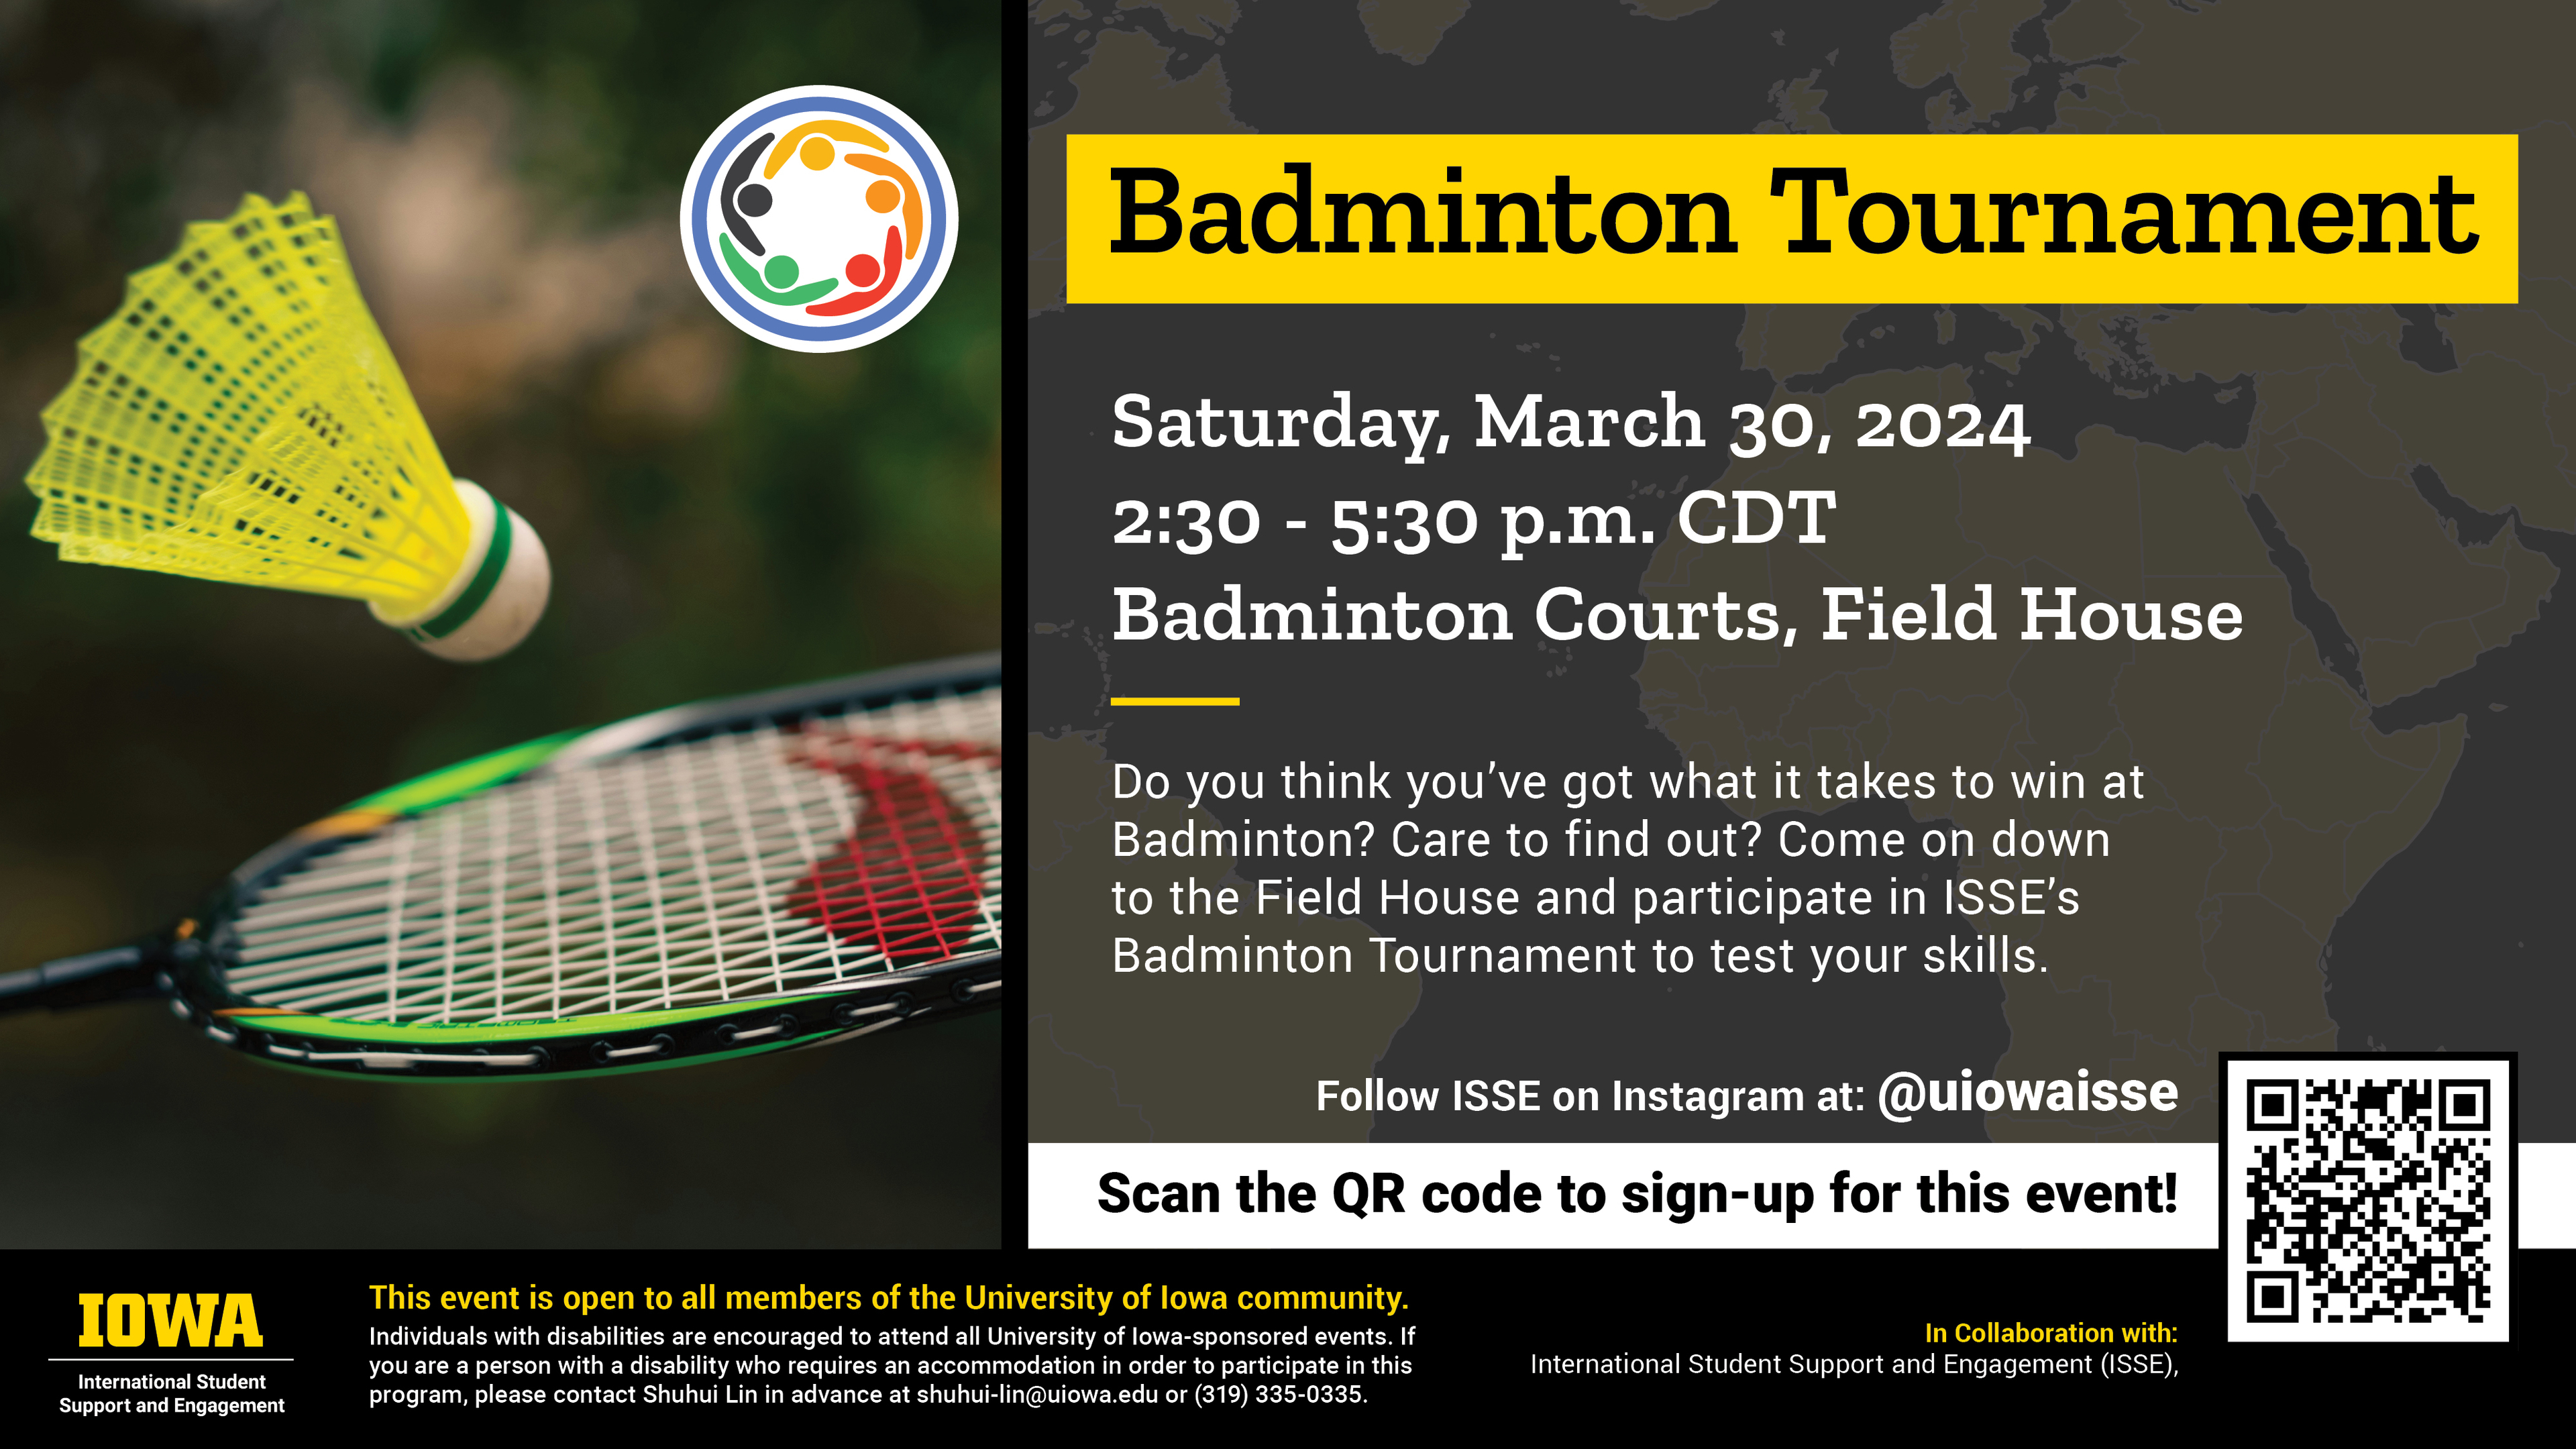 Title: Badminton Tournament  Date: Saturday, March 30, 2024  Time: 2:30 - 5:30 p.m. CDT  Location: Badminton Courts, Field House     Description: Do you think you’ve got what it takes to win at Badminton? Care to find out? Come on down to the Field House and participate in ISSE’s Badminton Tournament to test your skills. 